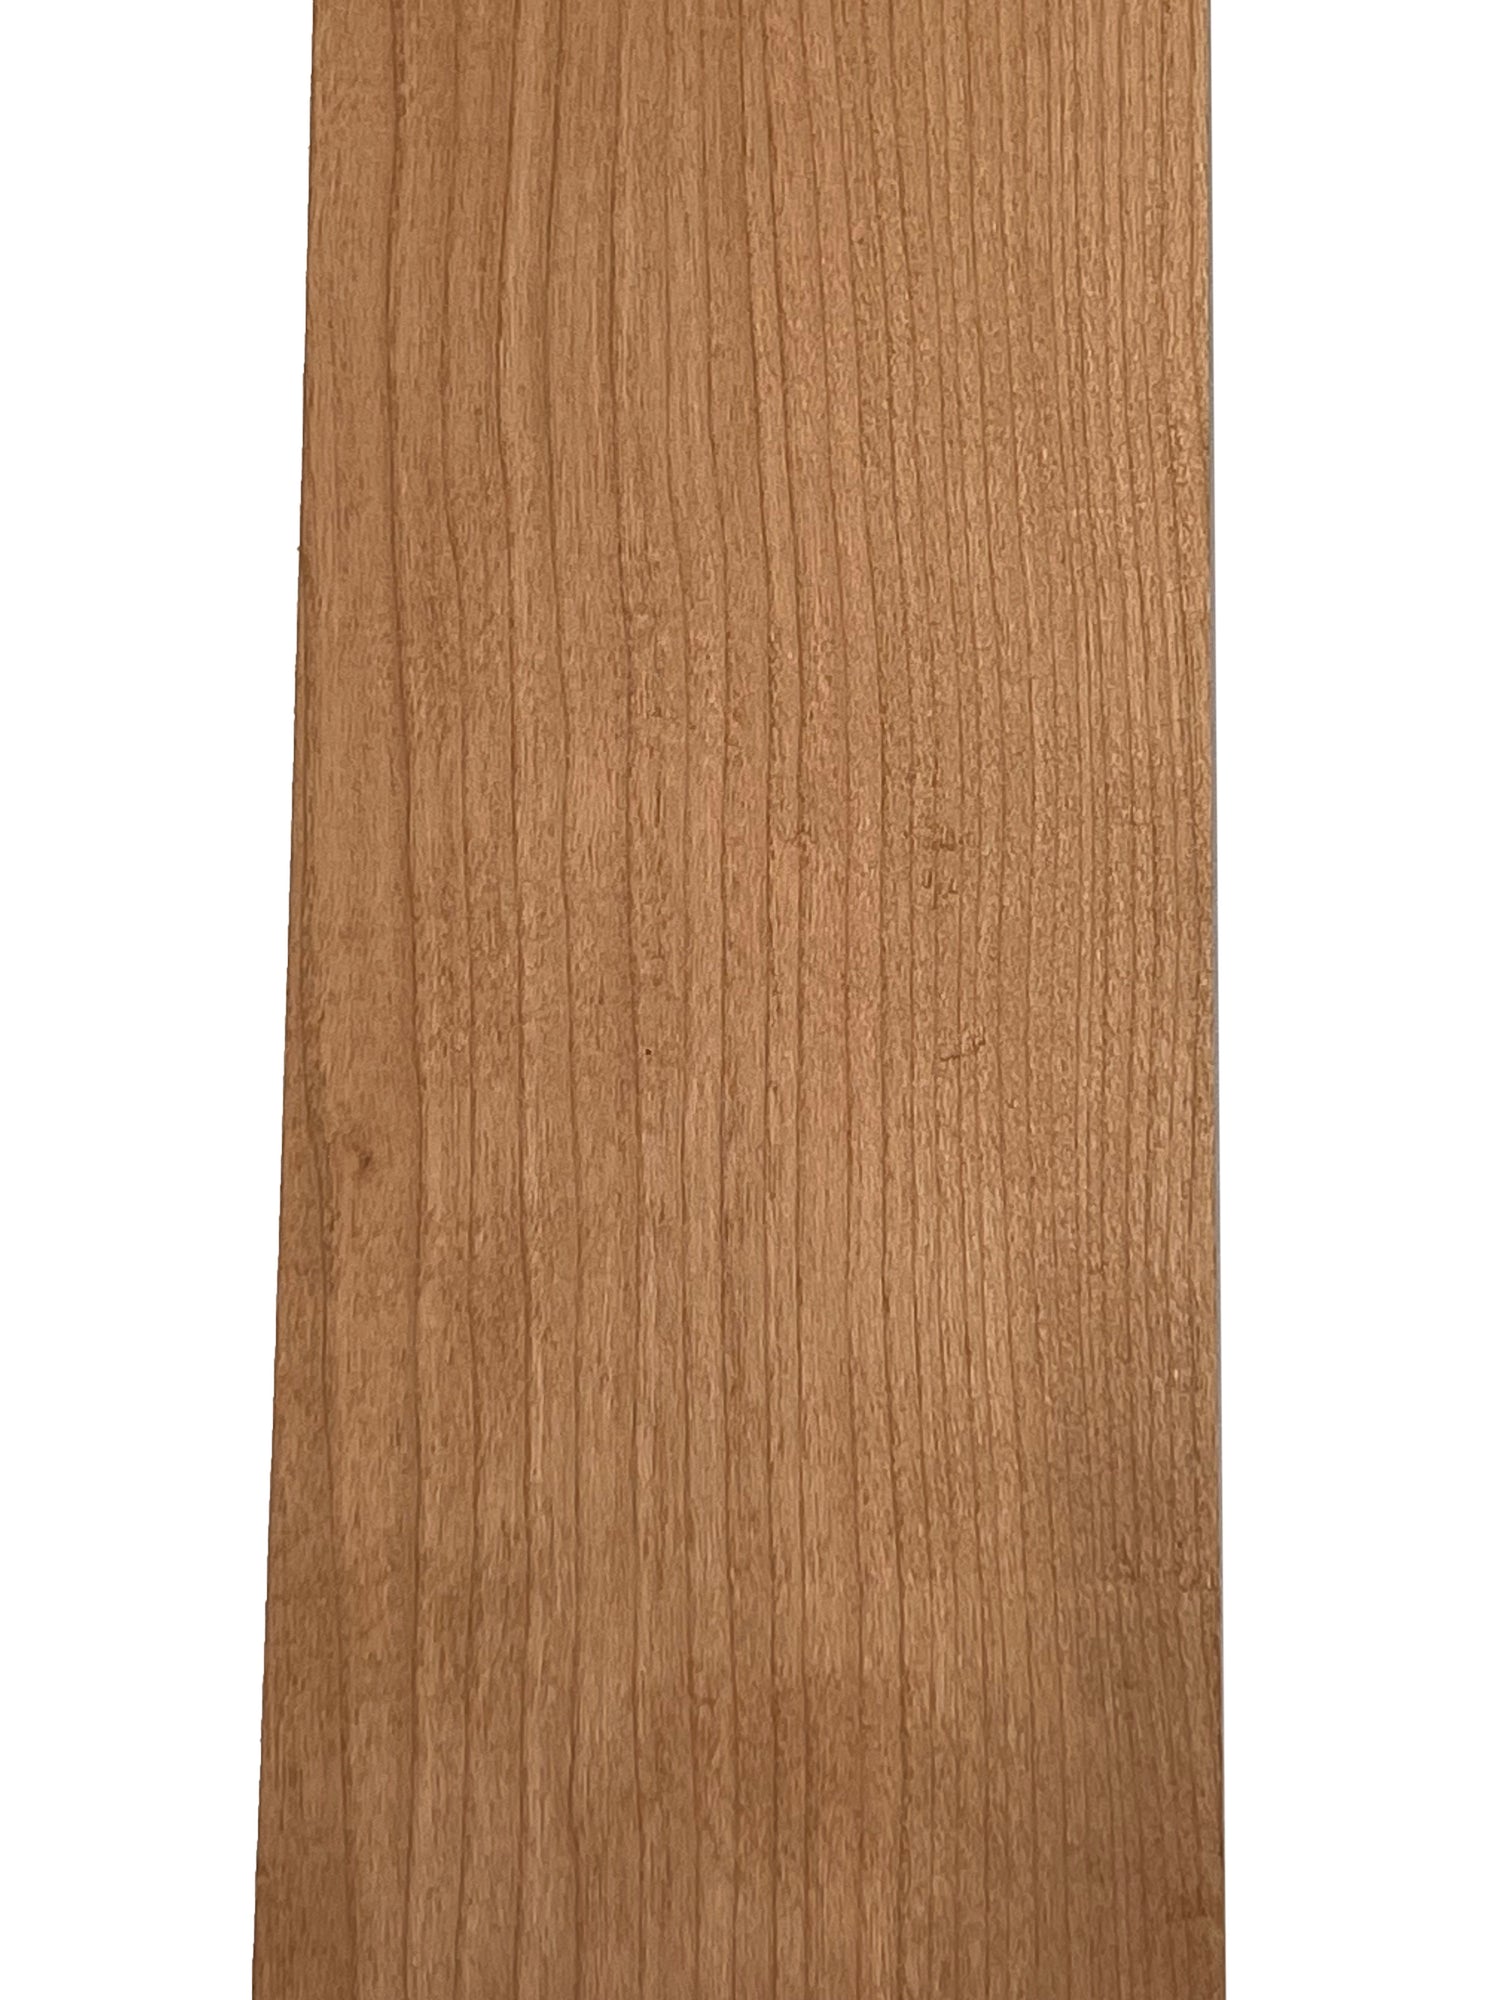 Combo Pack 10 ,Cherry Guitar Neck Blanks 30” x 3” x 1” - Exotic Wood Zone - Buy online Across USA 